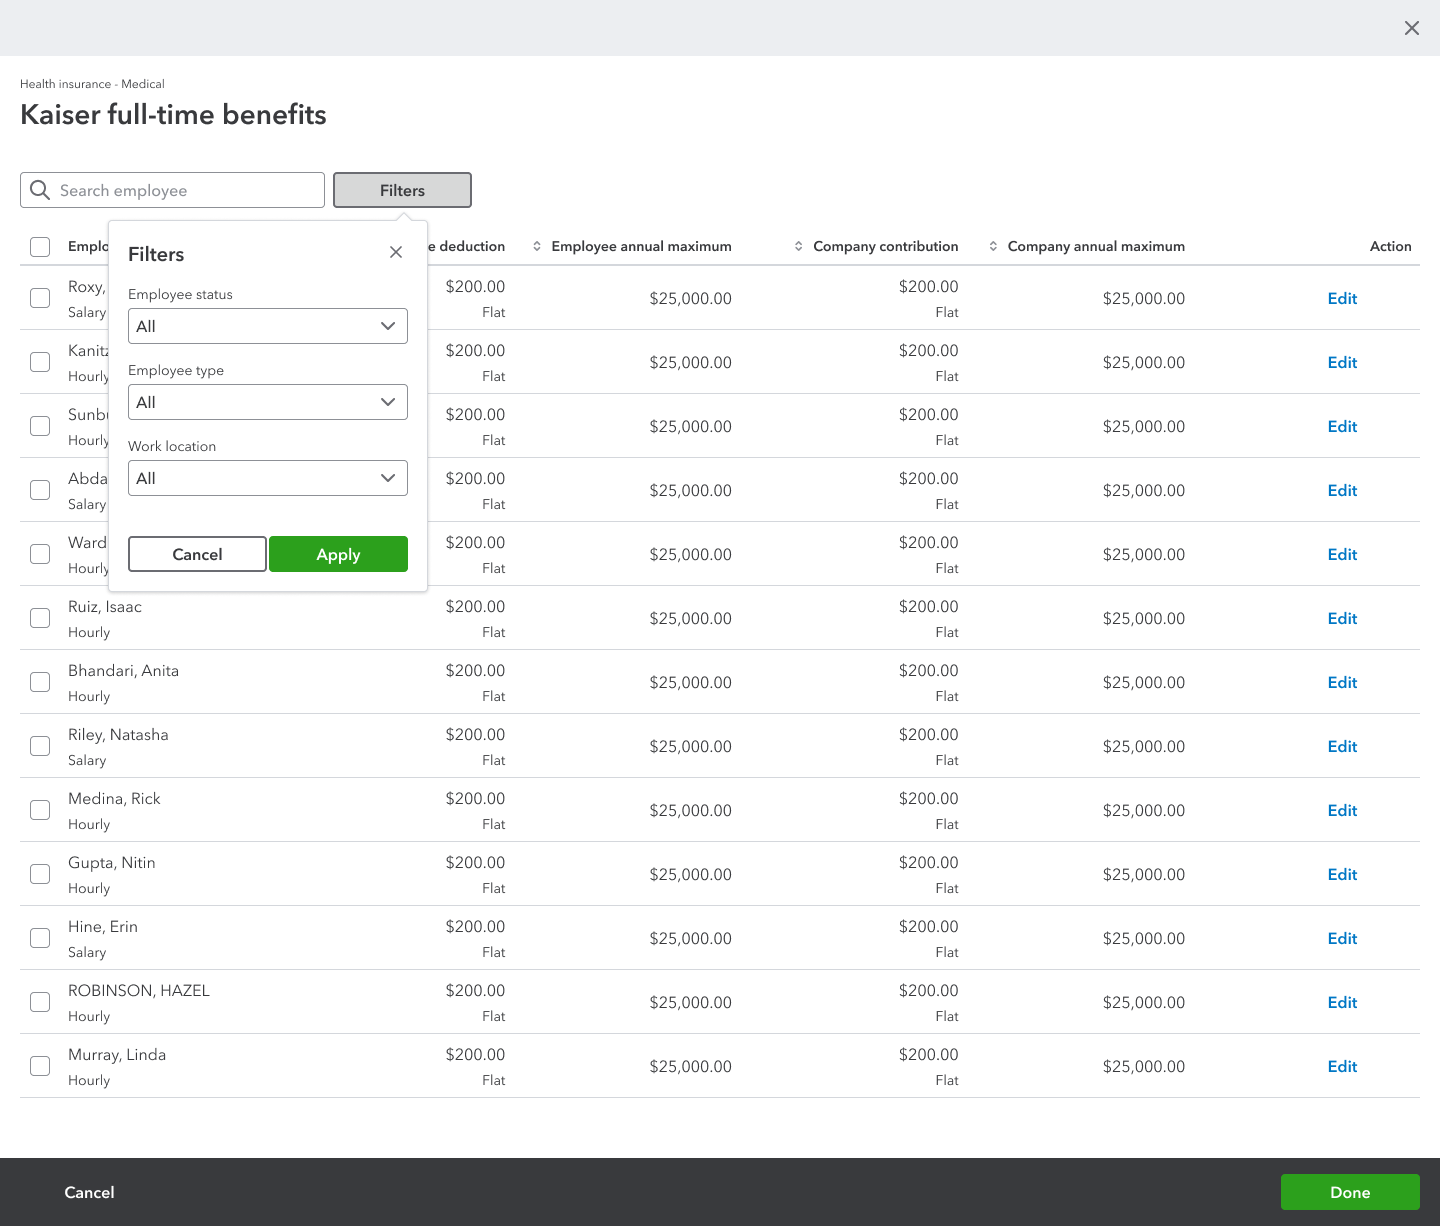 Filter payroll items to find the ones you want to manage.